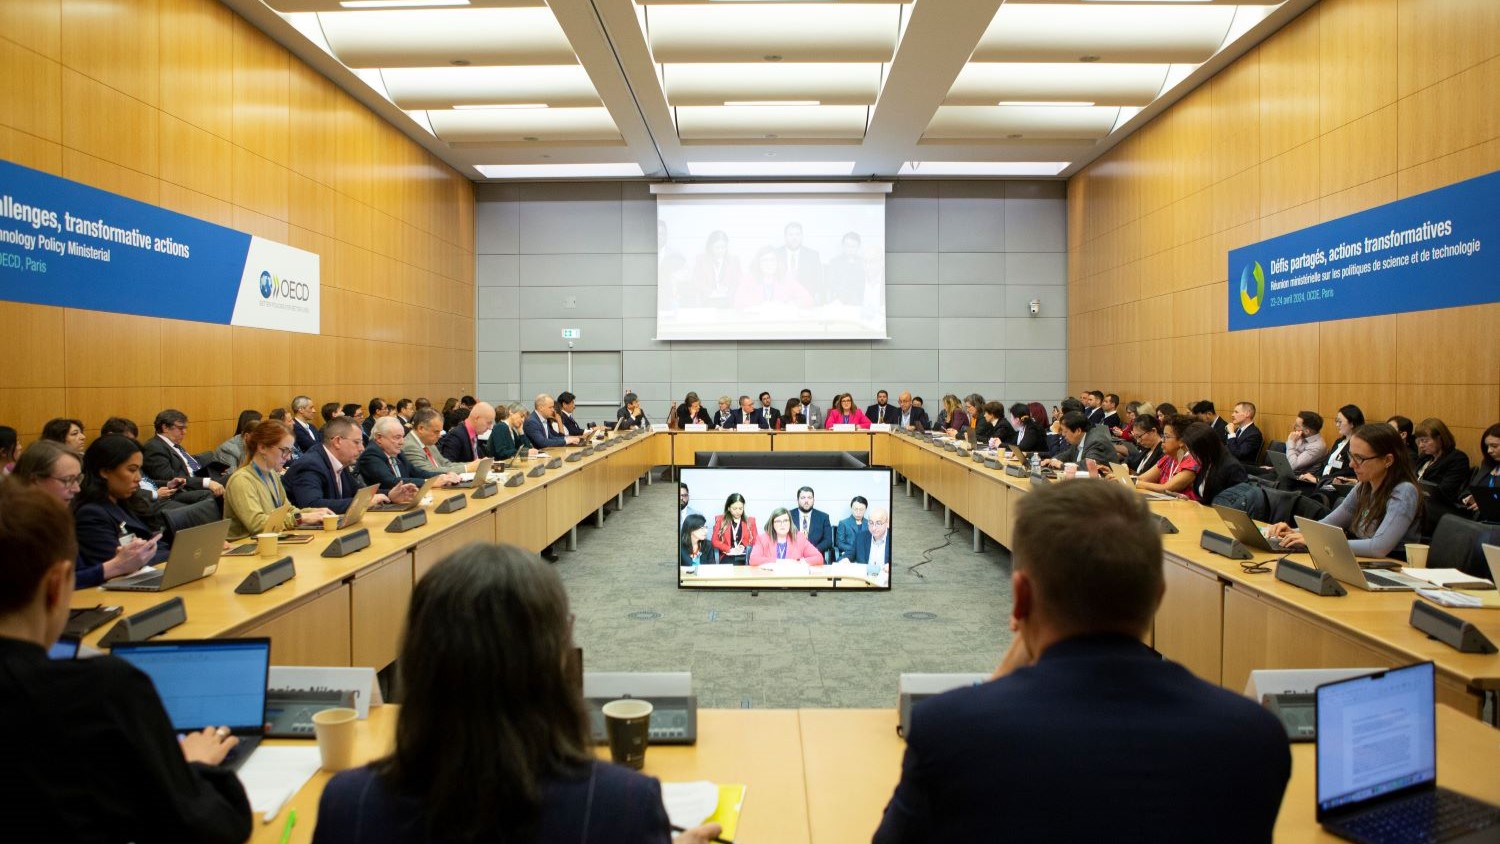 Dozens of professionals exchange insights and ideas in a large boardroom at the Organization for Economic Cooperation and Development headquarters.)